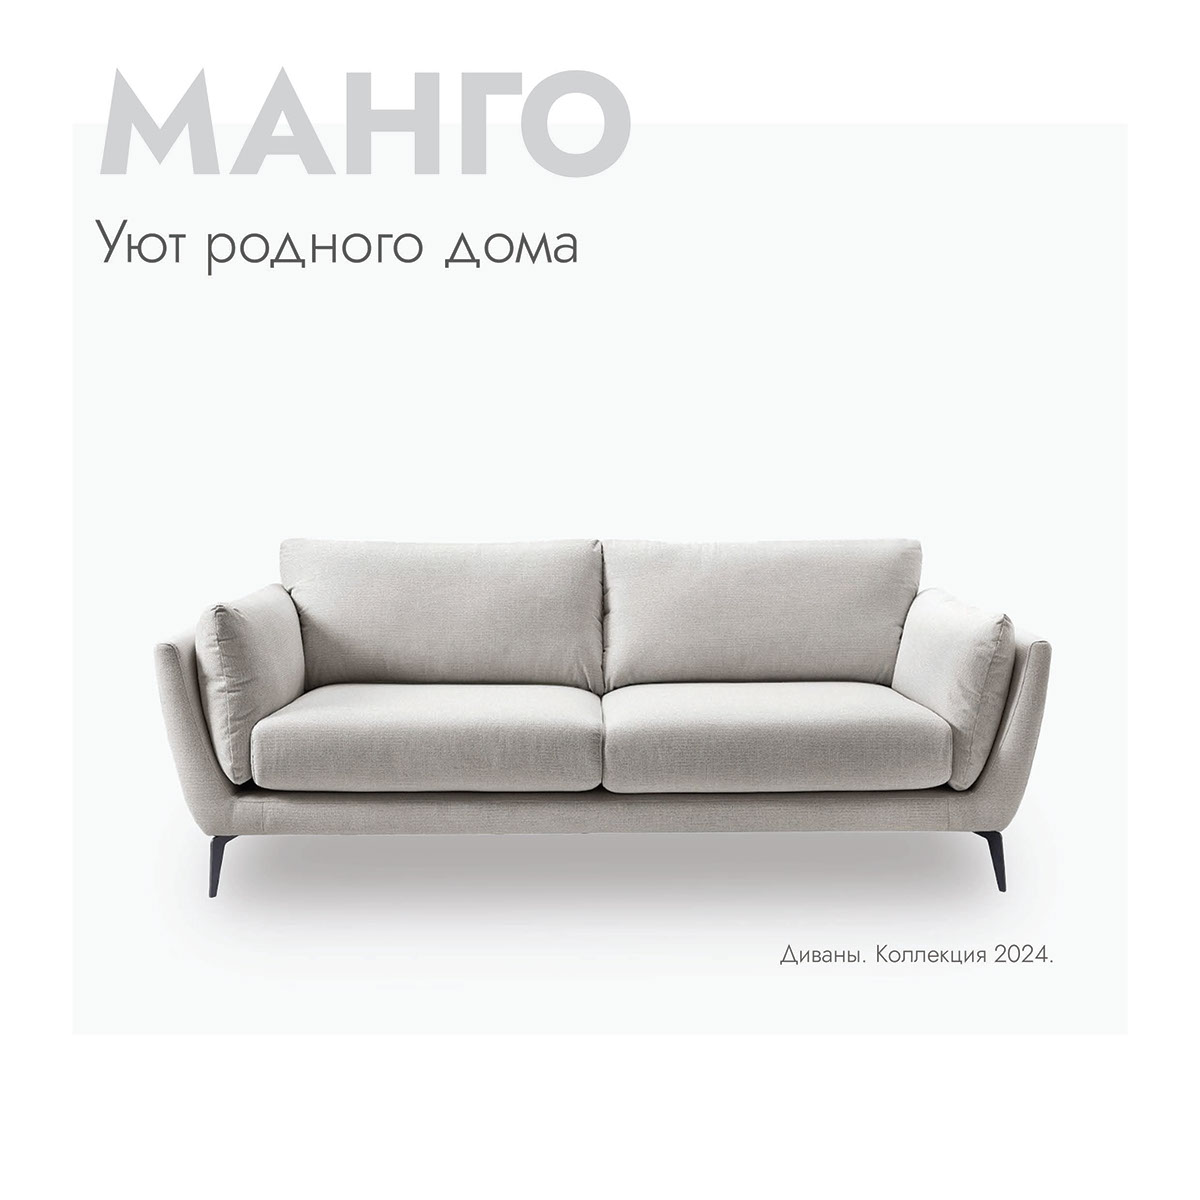 Couch catalogue rendition image